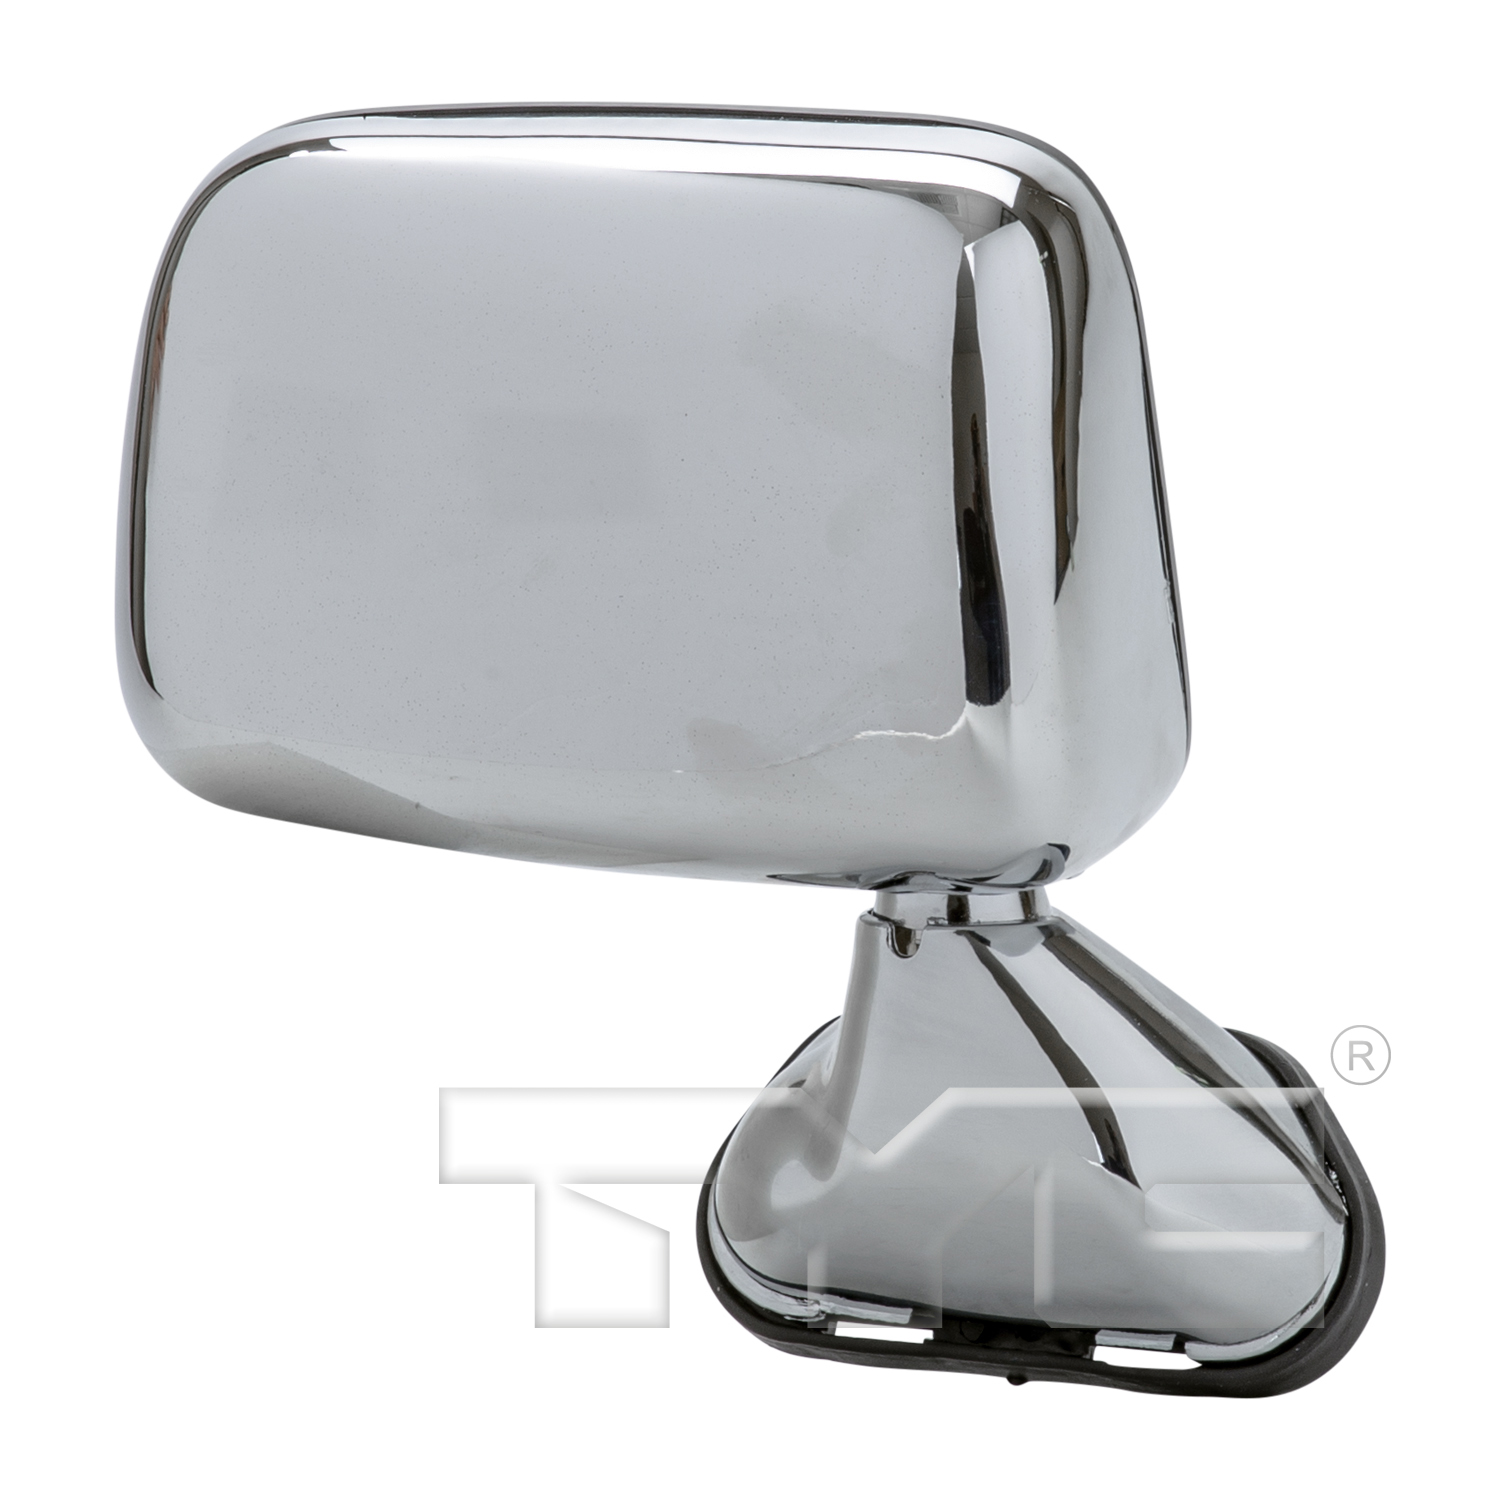 Aftermarket MIRRORS for TOYOTA - PICKUP, PICKUP,89-95,RT Mirror outside rear view